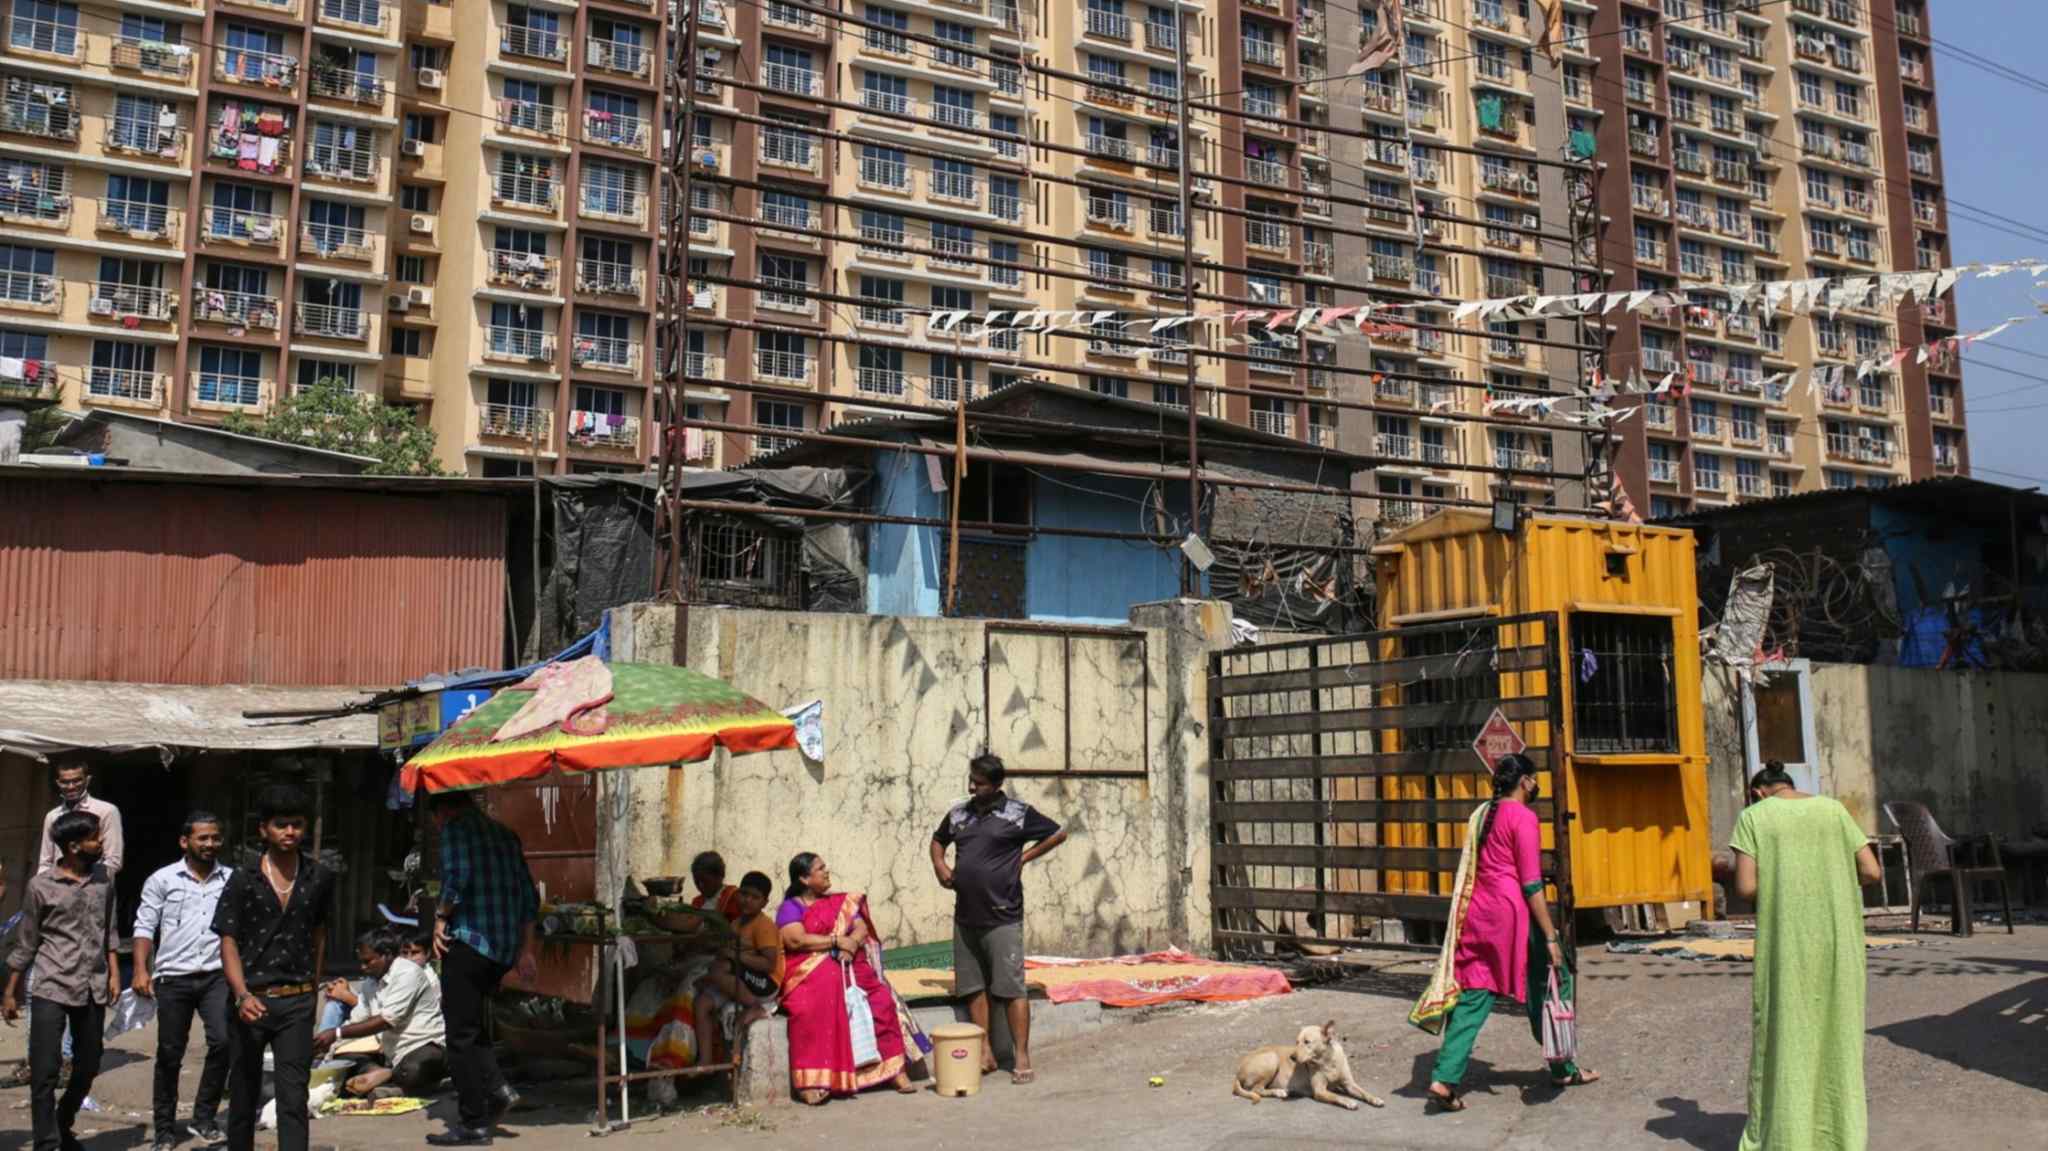 India’s booming young population will spur housing demand, says HDFC head 